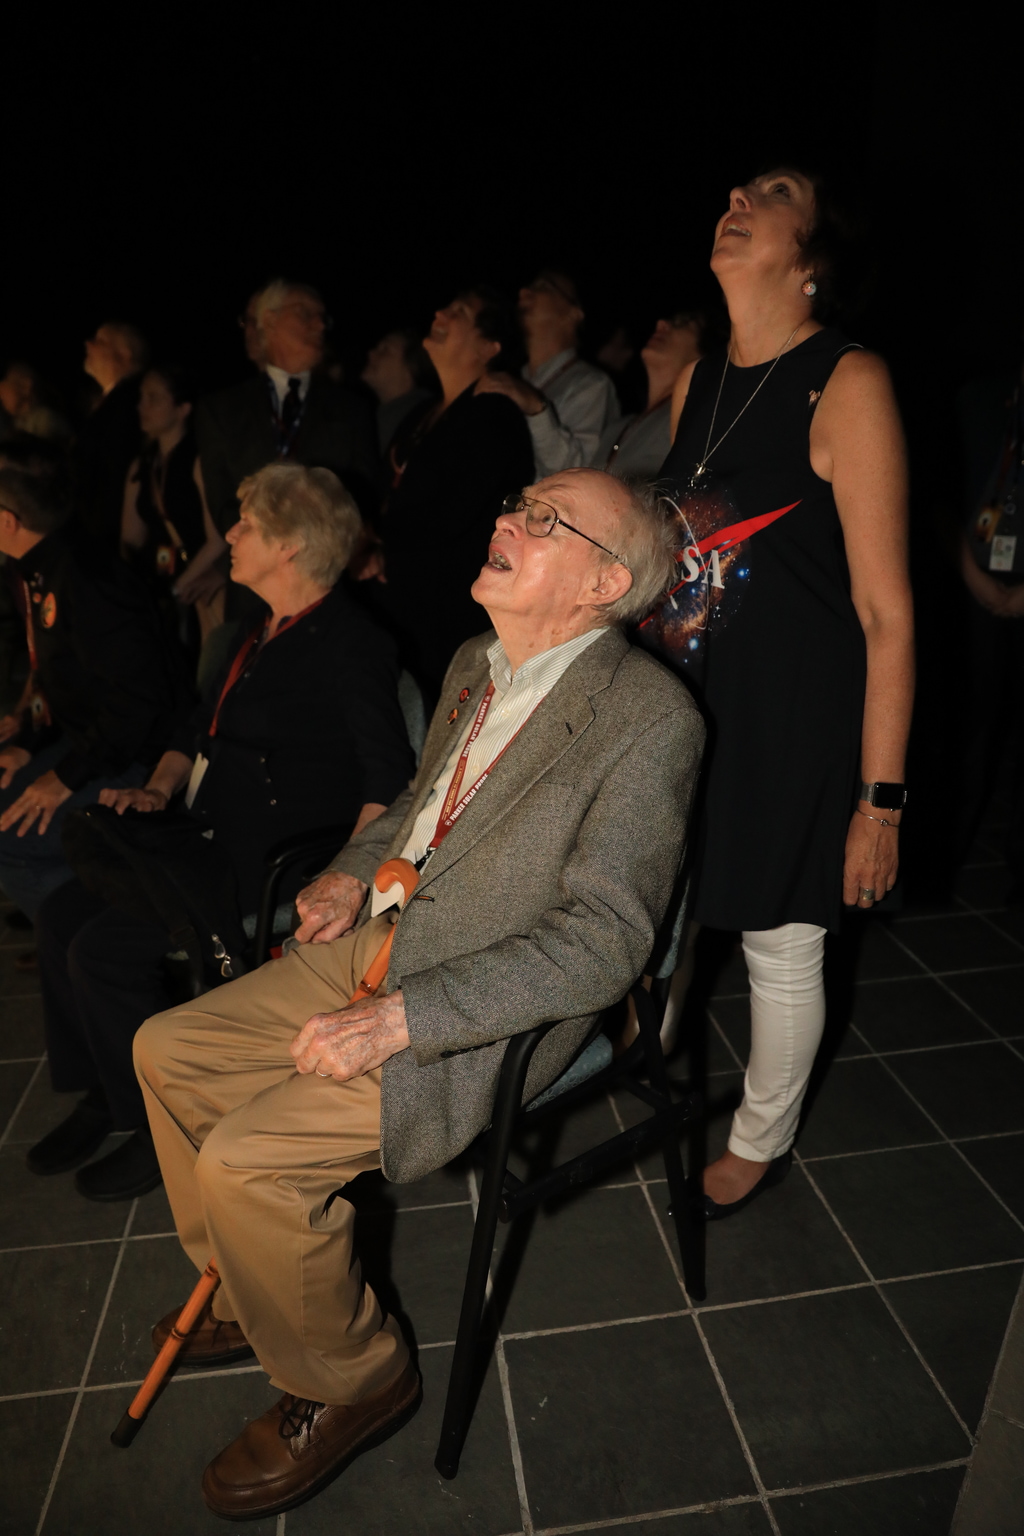 Eugene Parker watches the launch of the spacecraft that bears his name – NASA’s Parker Solar Probe – early in the morning of Aug. 12, 2018. NASA Director of Heliophysics Nicky Fox, who at the time was the Parker Solar Probe project scientist, stands behind him. Parker Solar Probe is humanity’s first mission to the Sun and has traveled closer to our star than any spacecraft before.